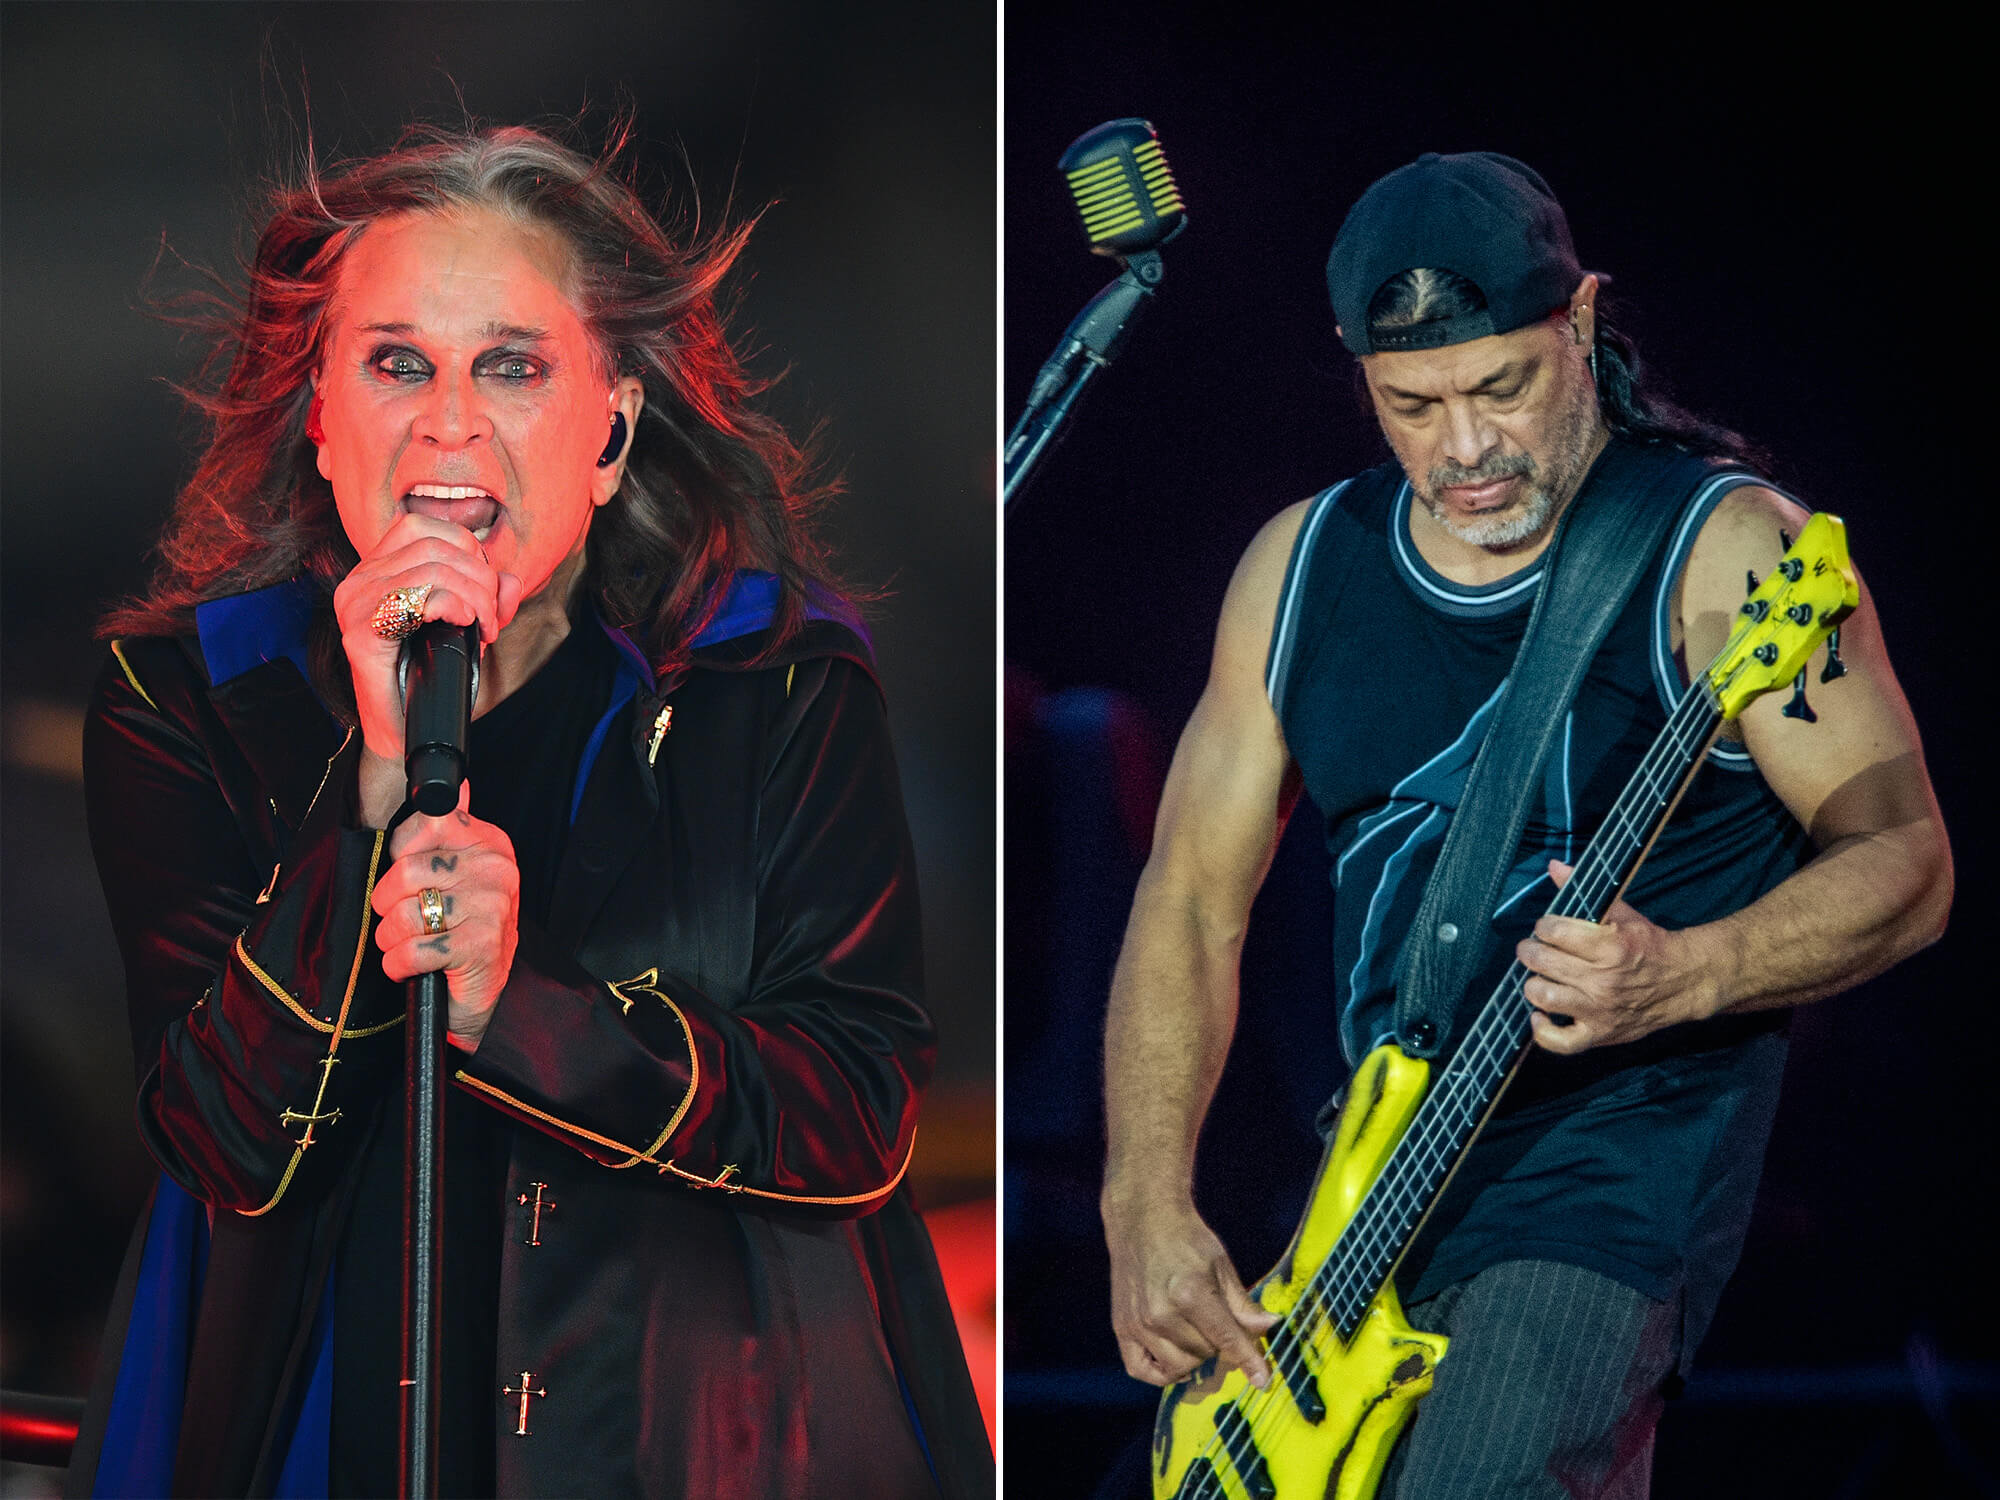 Ozzy Osbourne (left) pictured wide-eyed and singing into a mic. Robert Trujillo (right) playing a bright yellow bass, matching Metallica's 72 Seasons album colour.